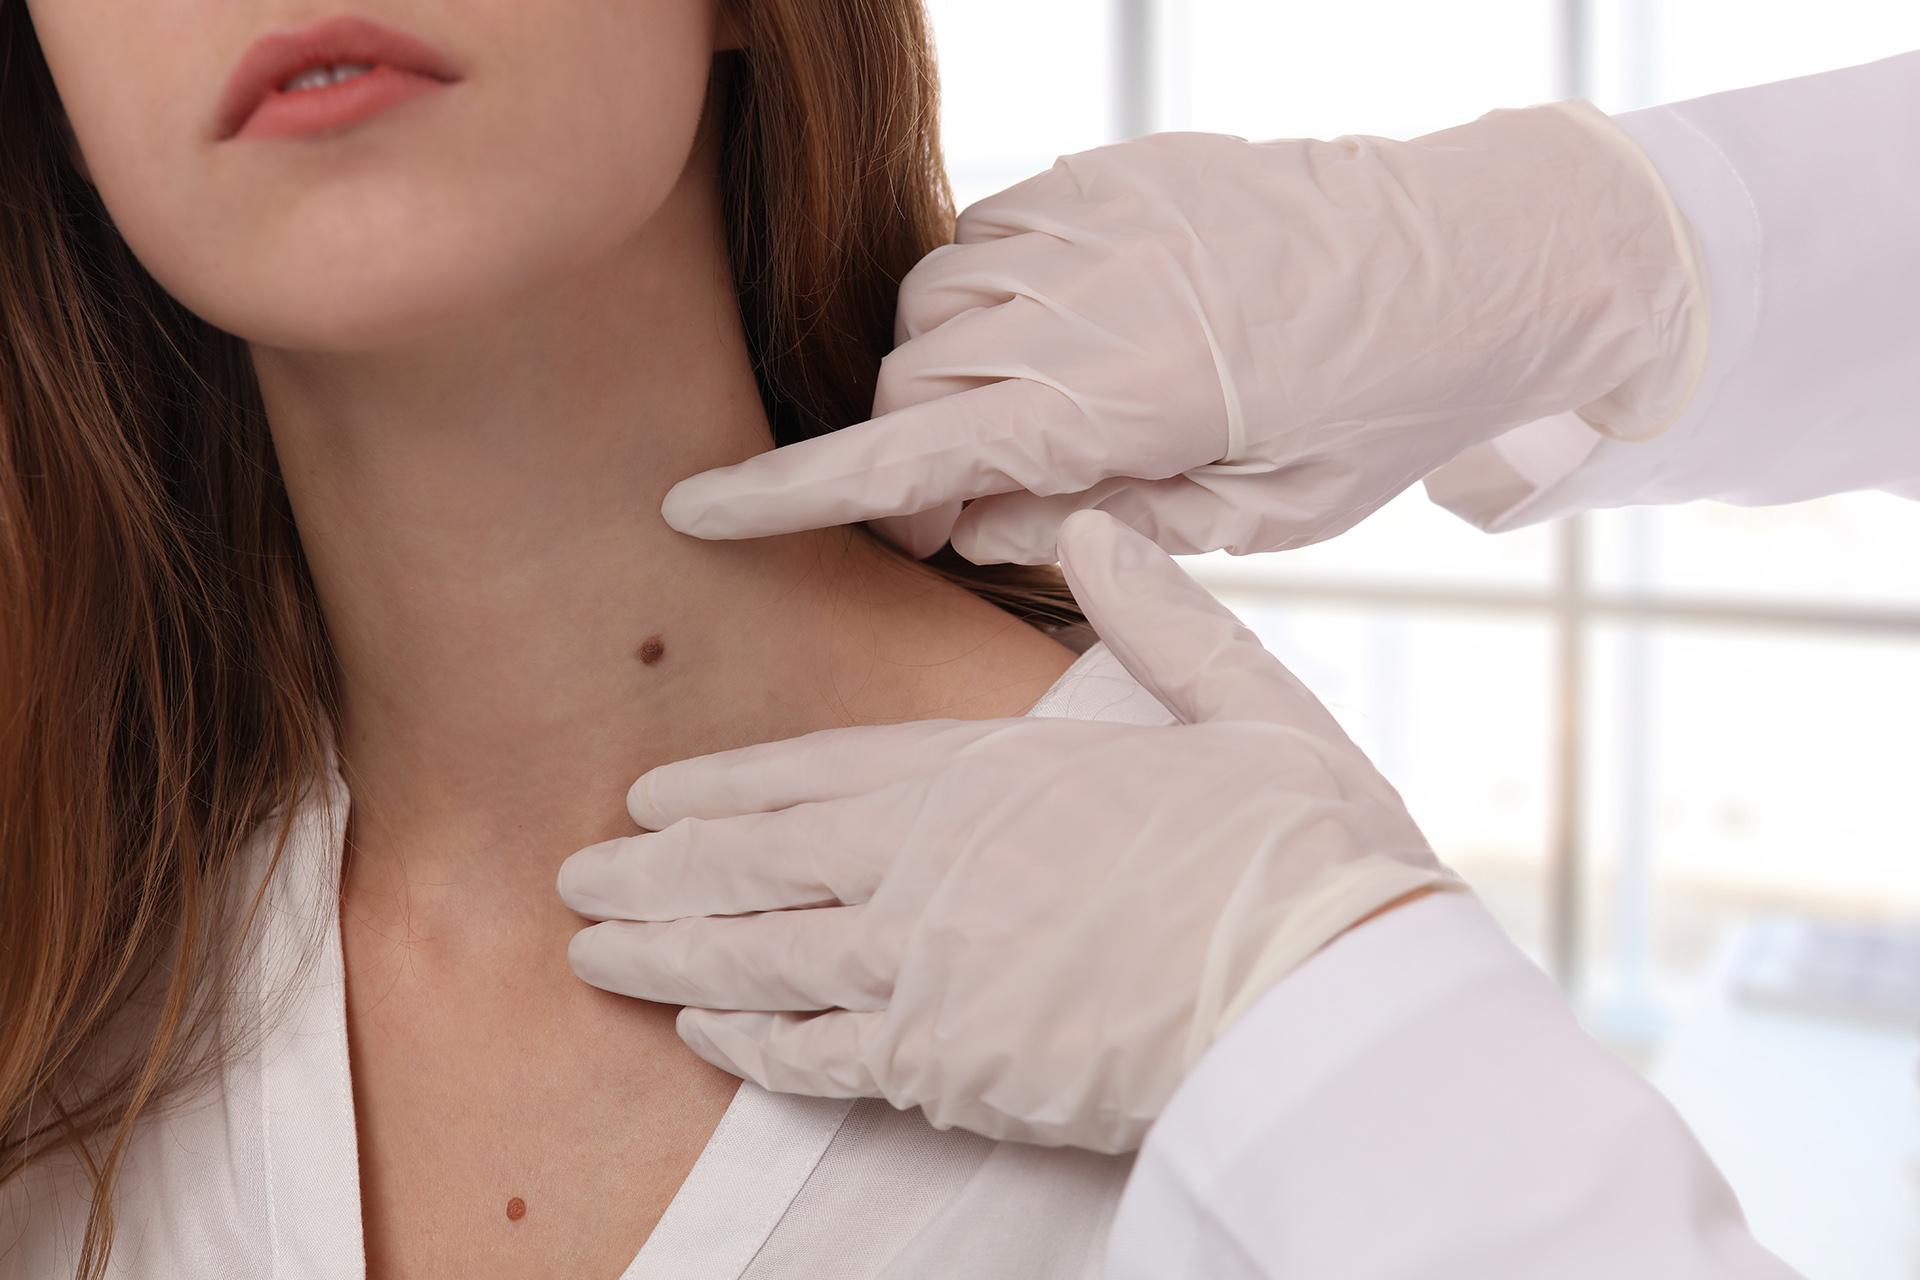 Thinking About Skin Tag Removal? Keep These 4 Points in Mind